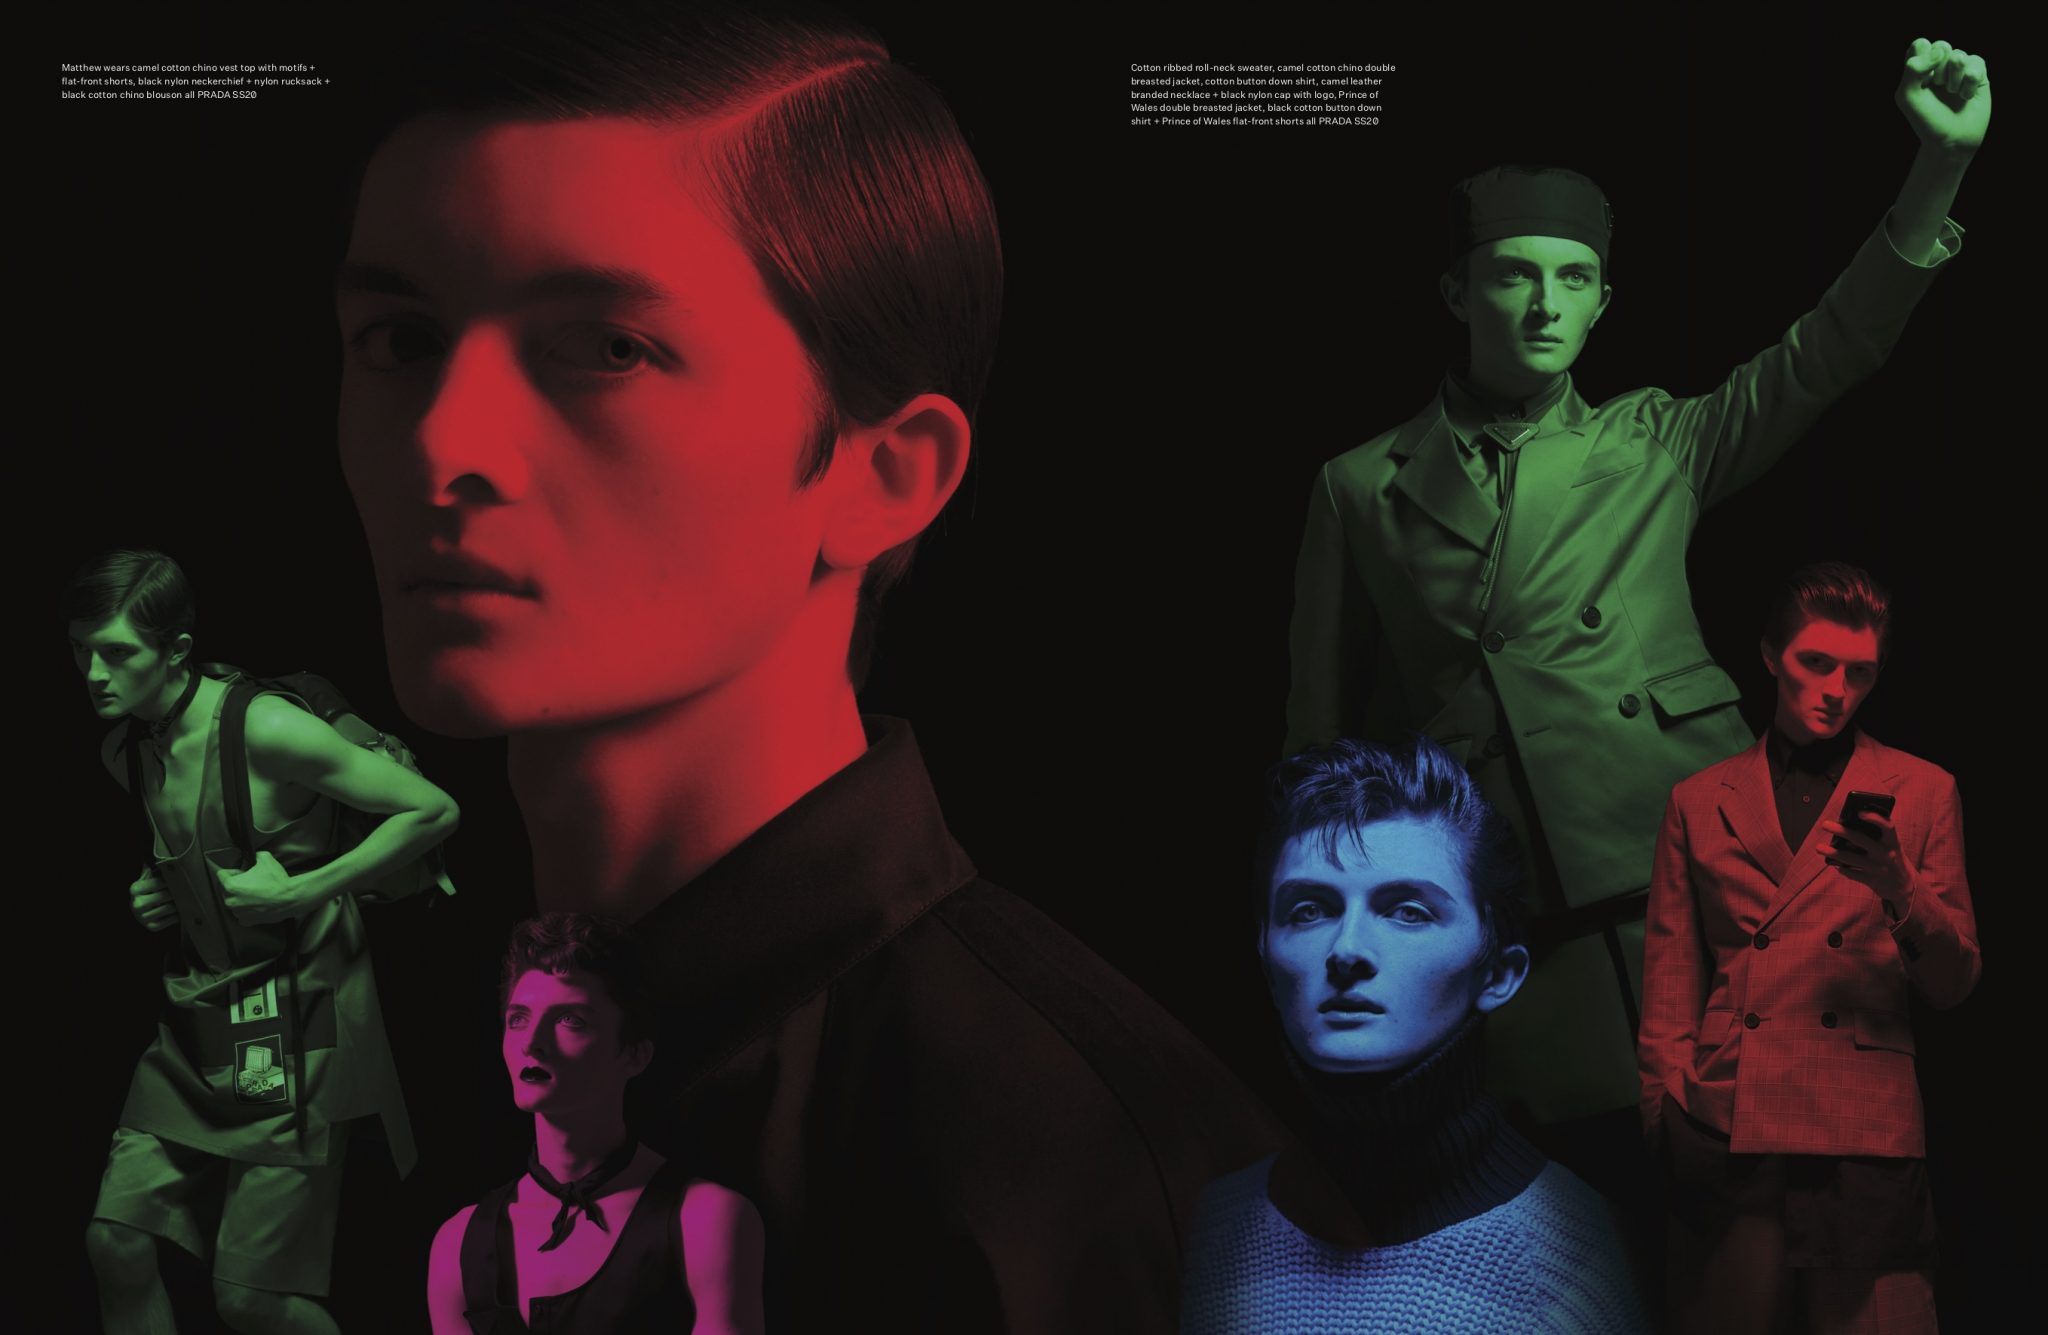 David Bradshaw | Arena Homme +: Construct of an Icon | 19